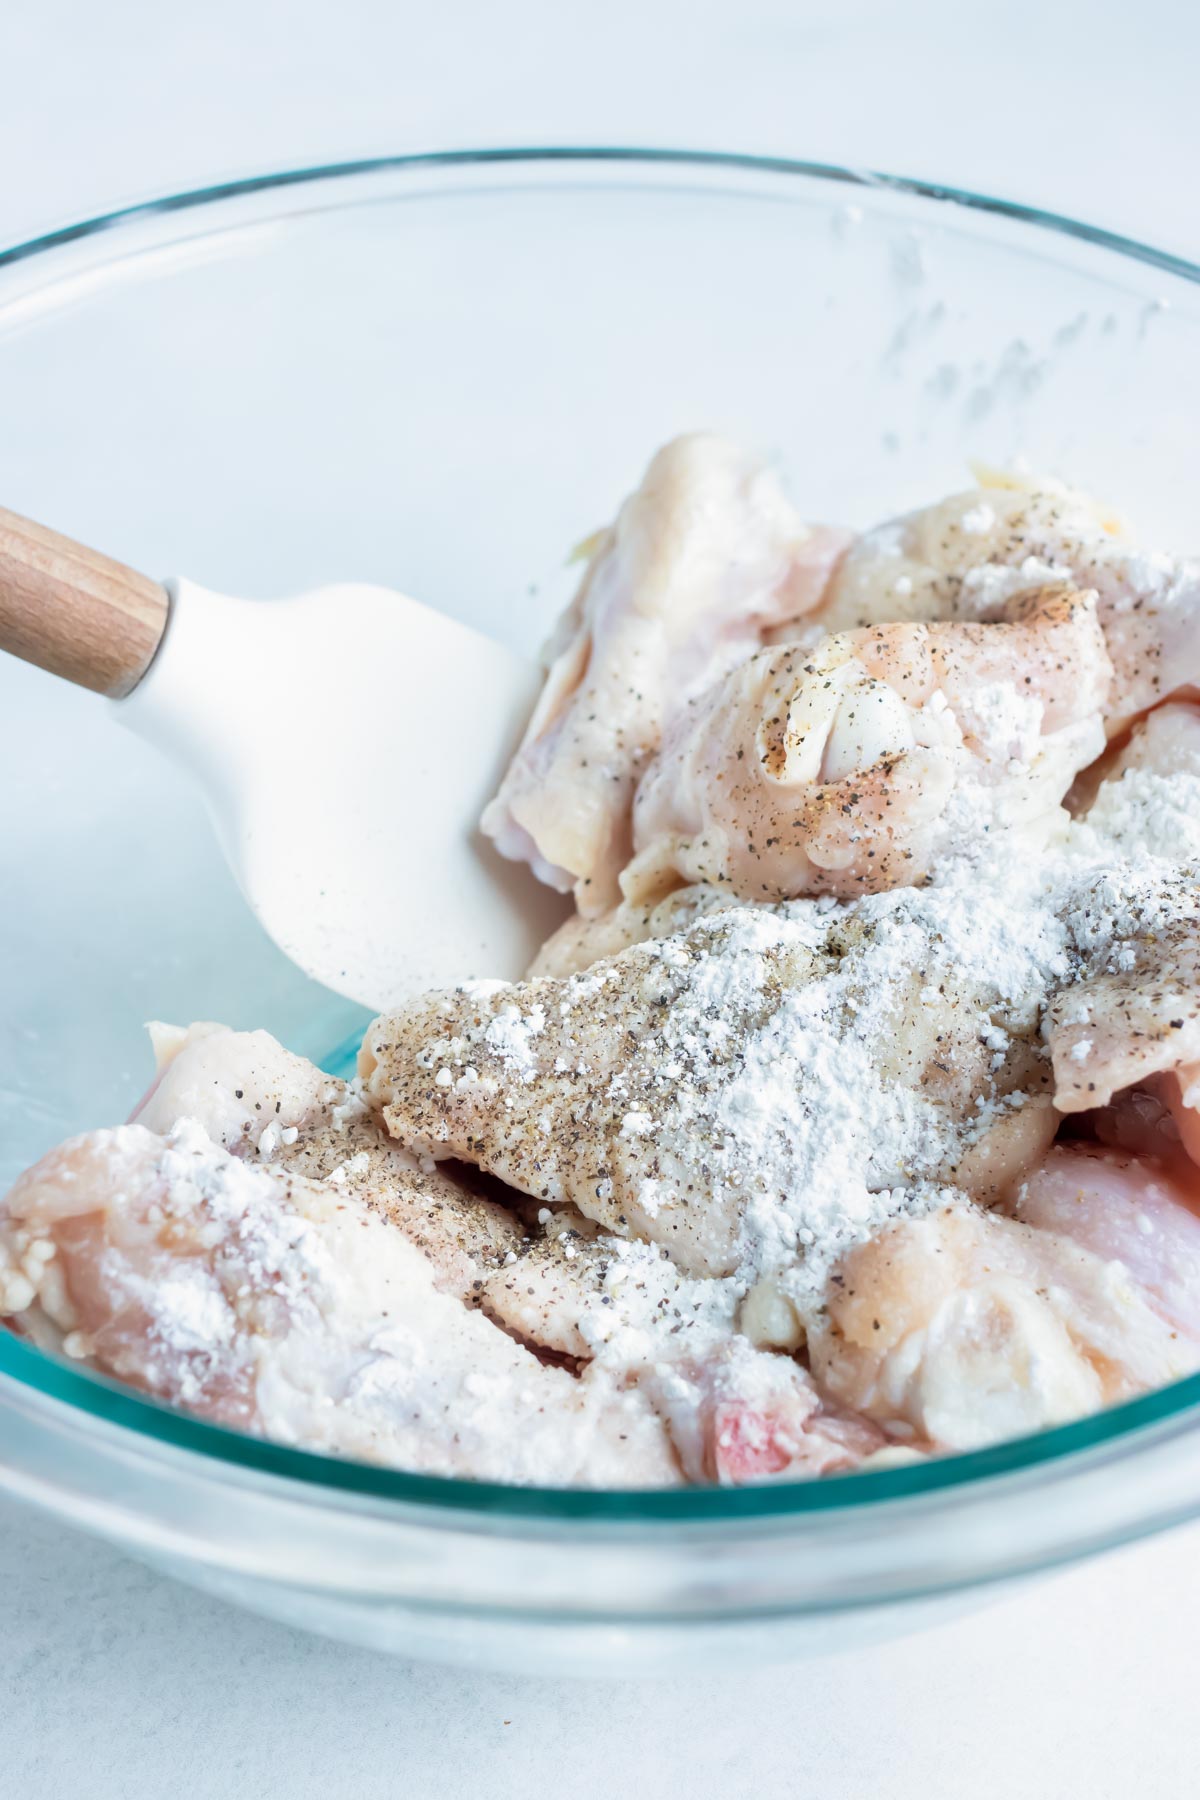 Raw chicken wings are coated in cornstarch for an ultra crispy texture.